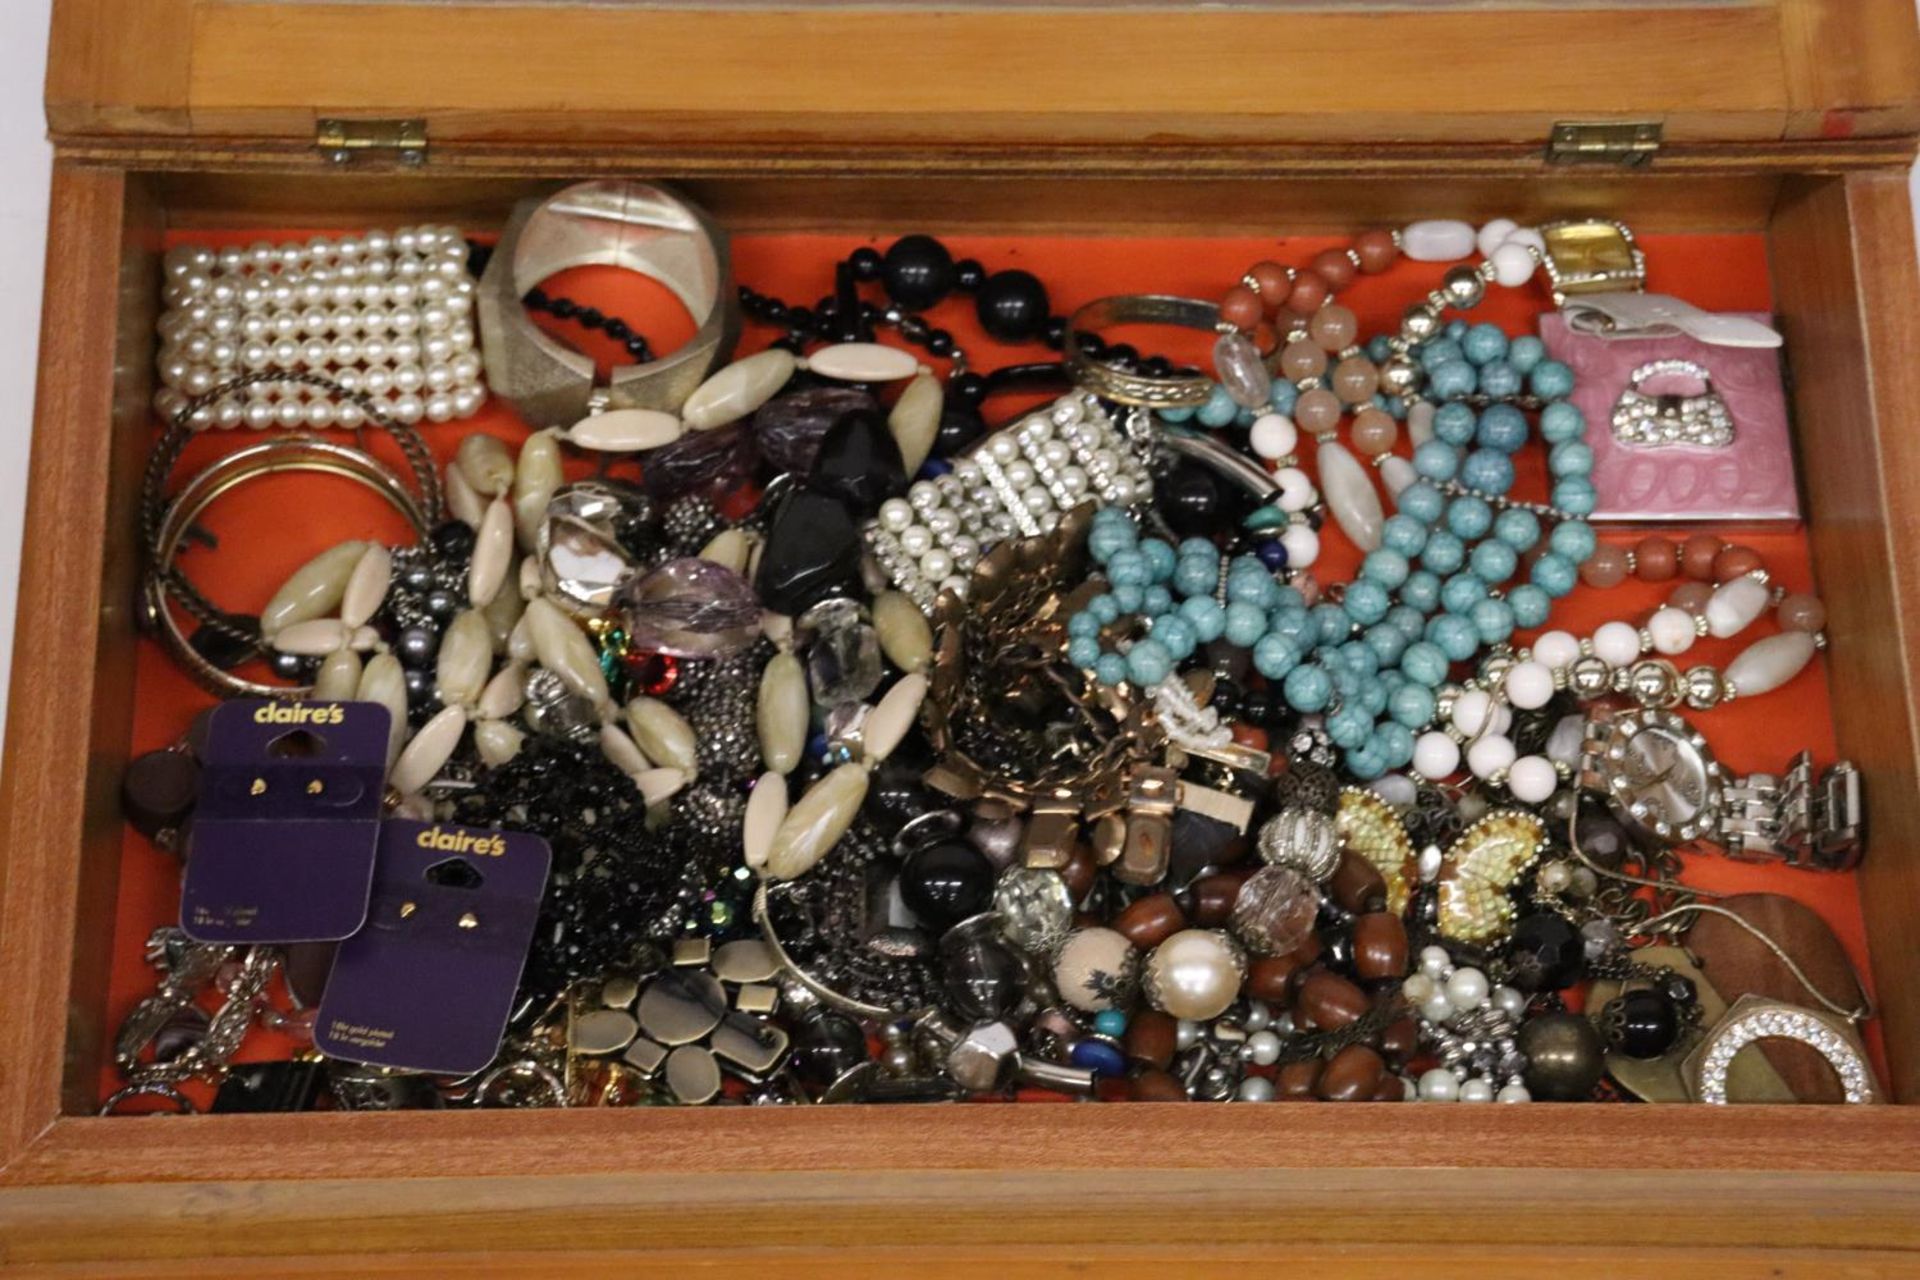 A QUANTITY OF COSTUME JEWELLERY IN A GLASS TOPPED DISPLAY CASE - Image 3 of 6